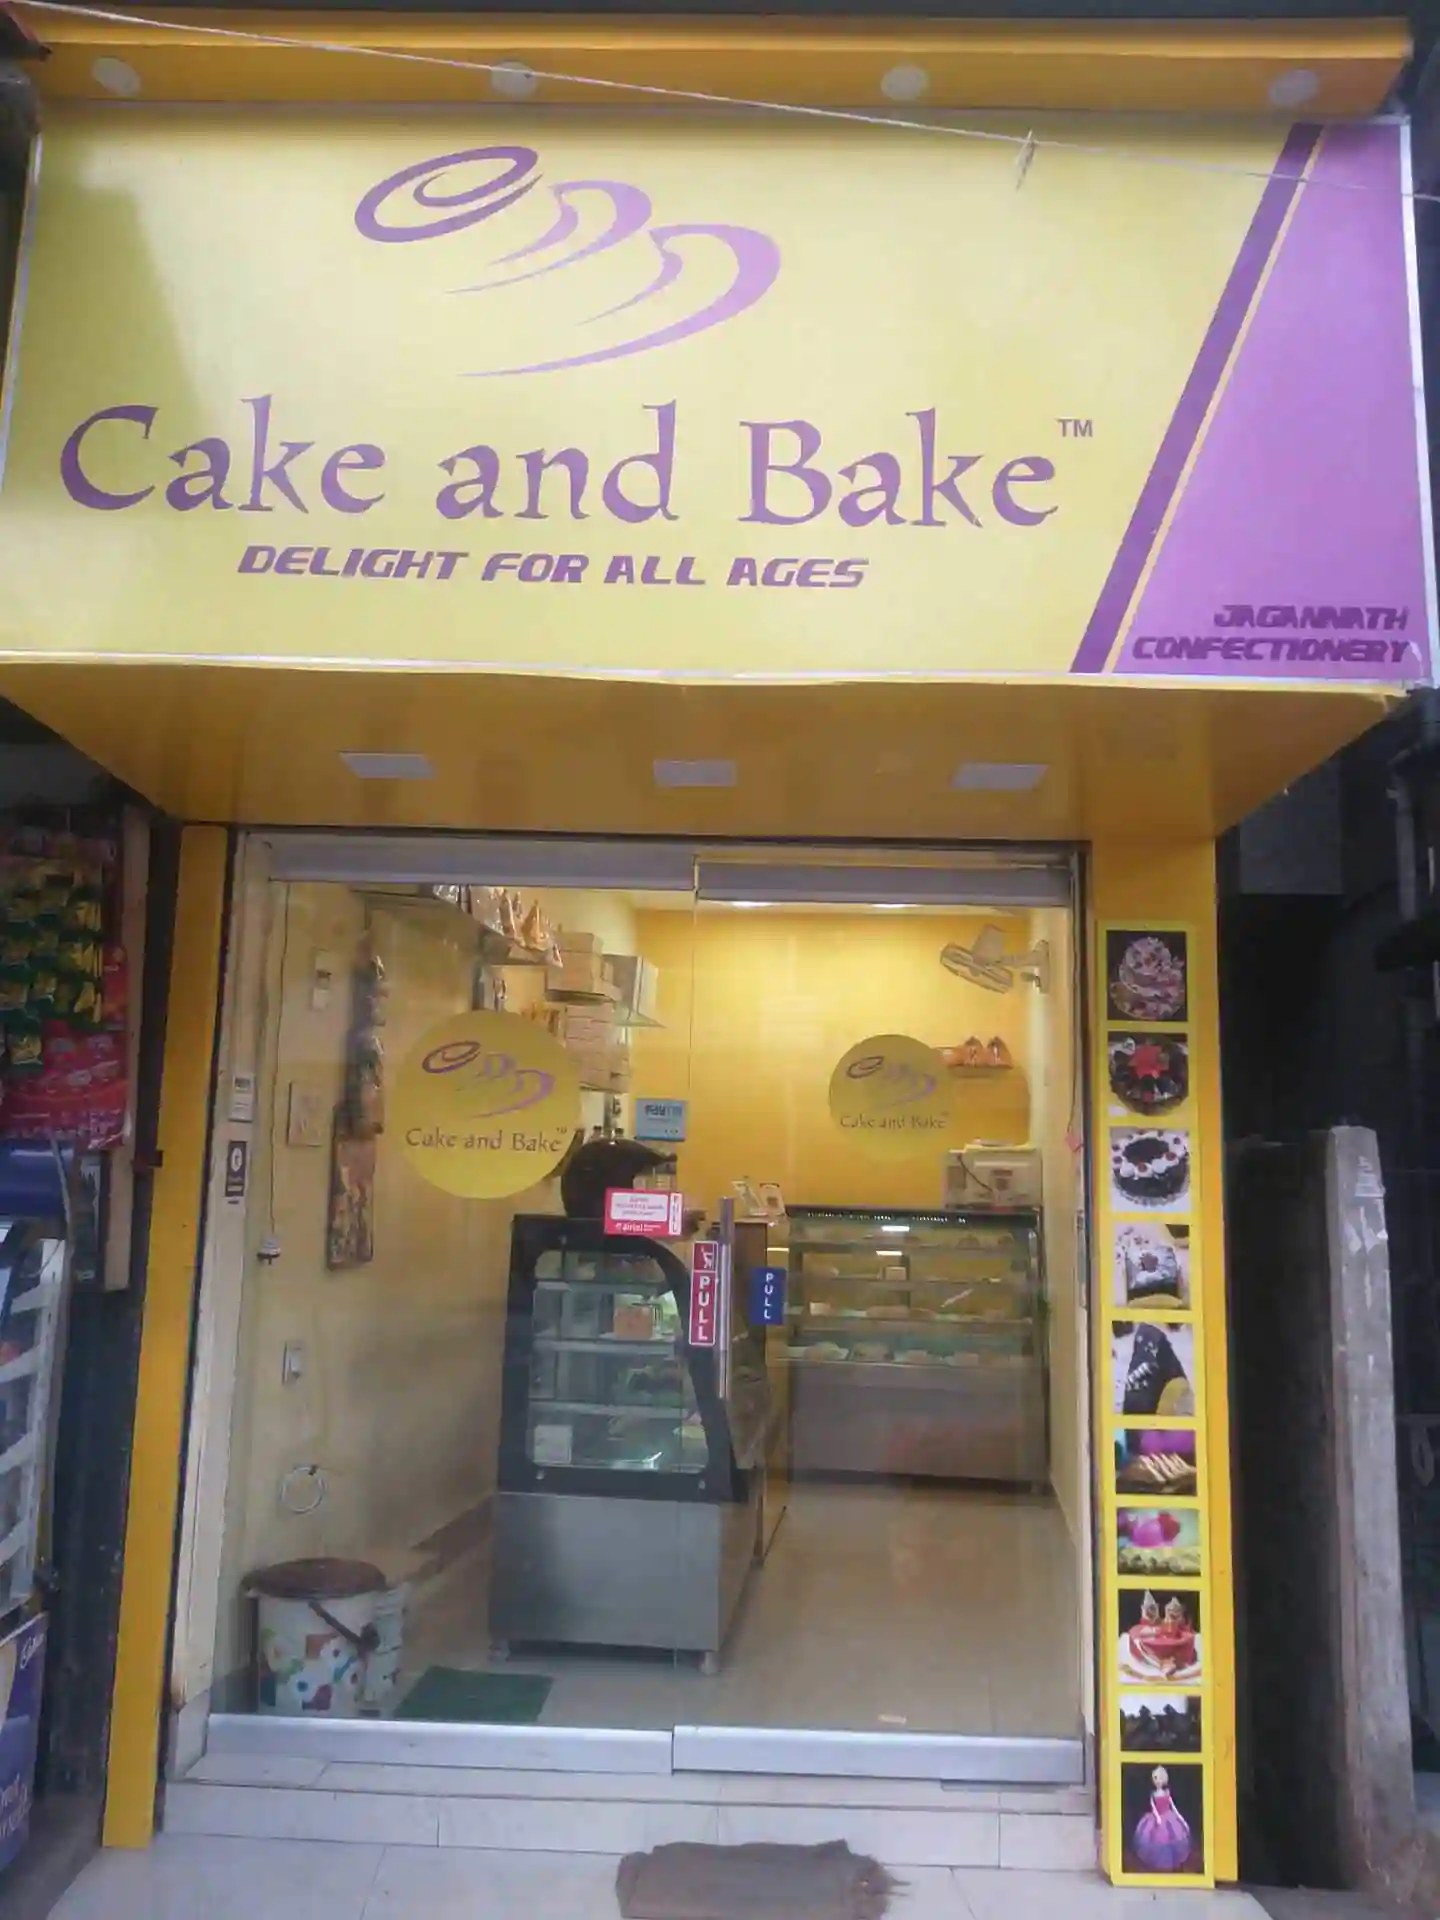 Which is the most profitable cake franchise in India? - Quora